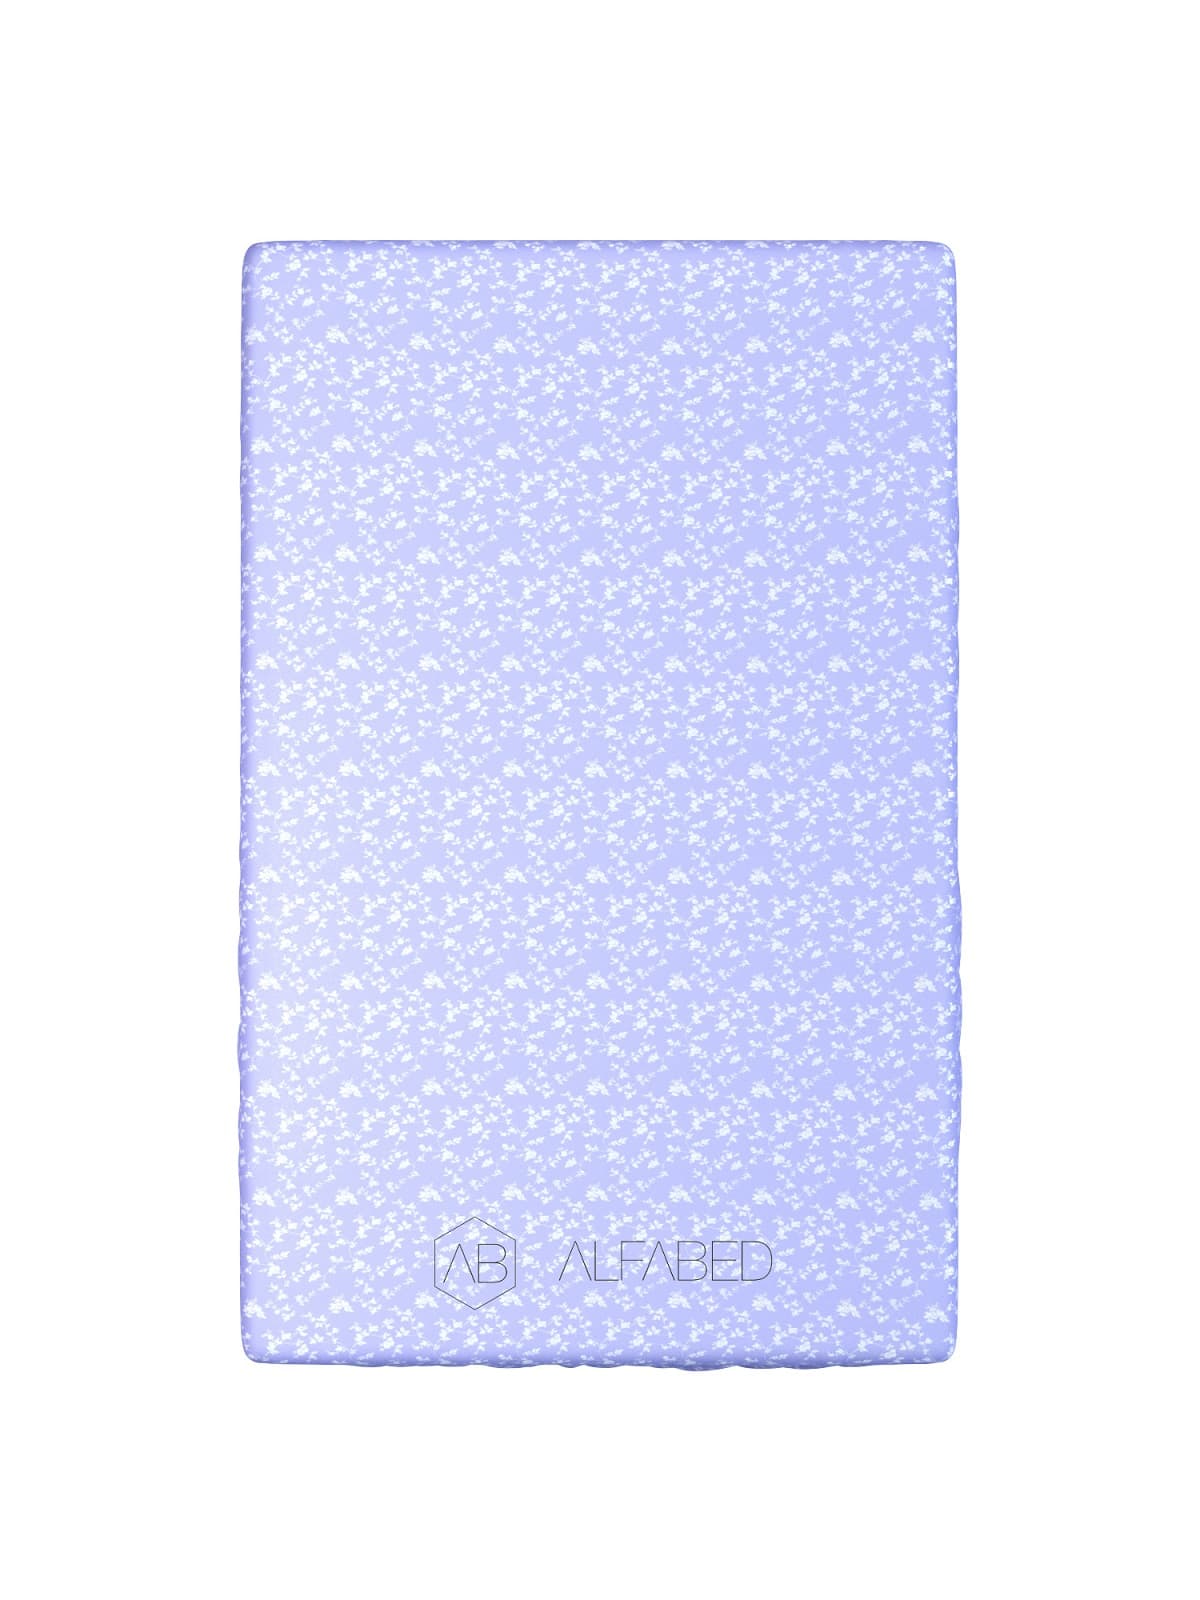 Fitted Sheet Lux Double Face Jacquard Modal Provance Violet H-201